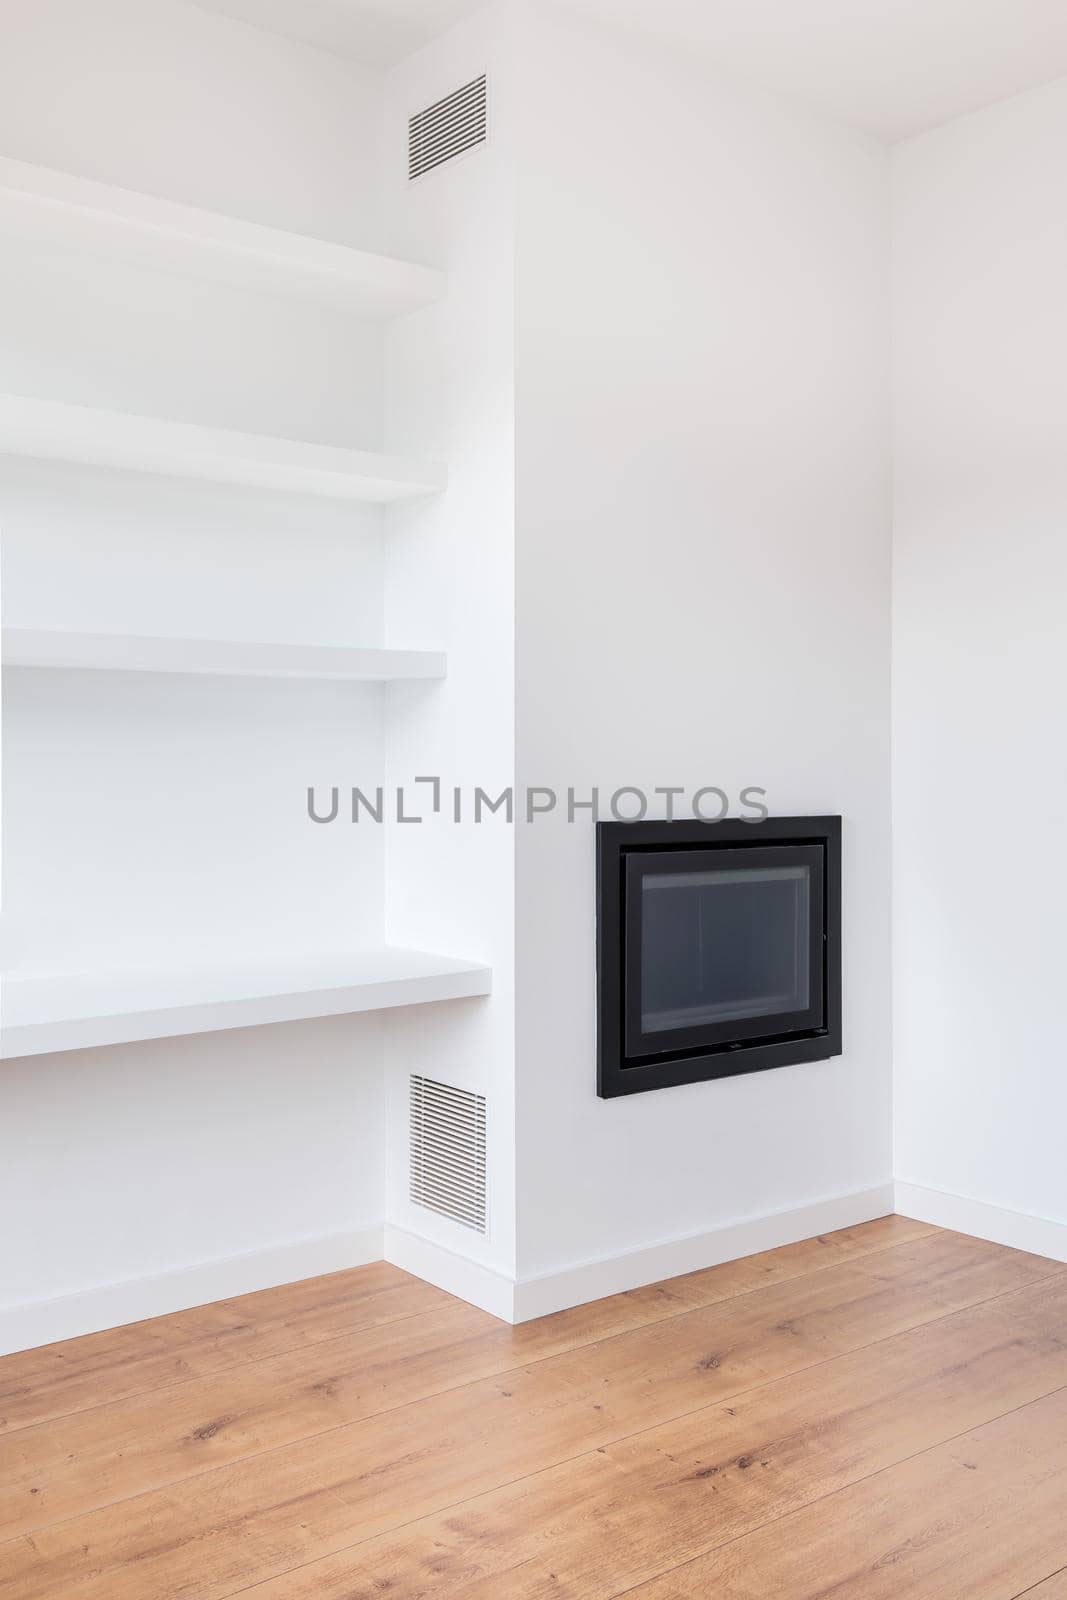 Part of white living room in a newly renovated apartment with a fireplace, shelves and vents.